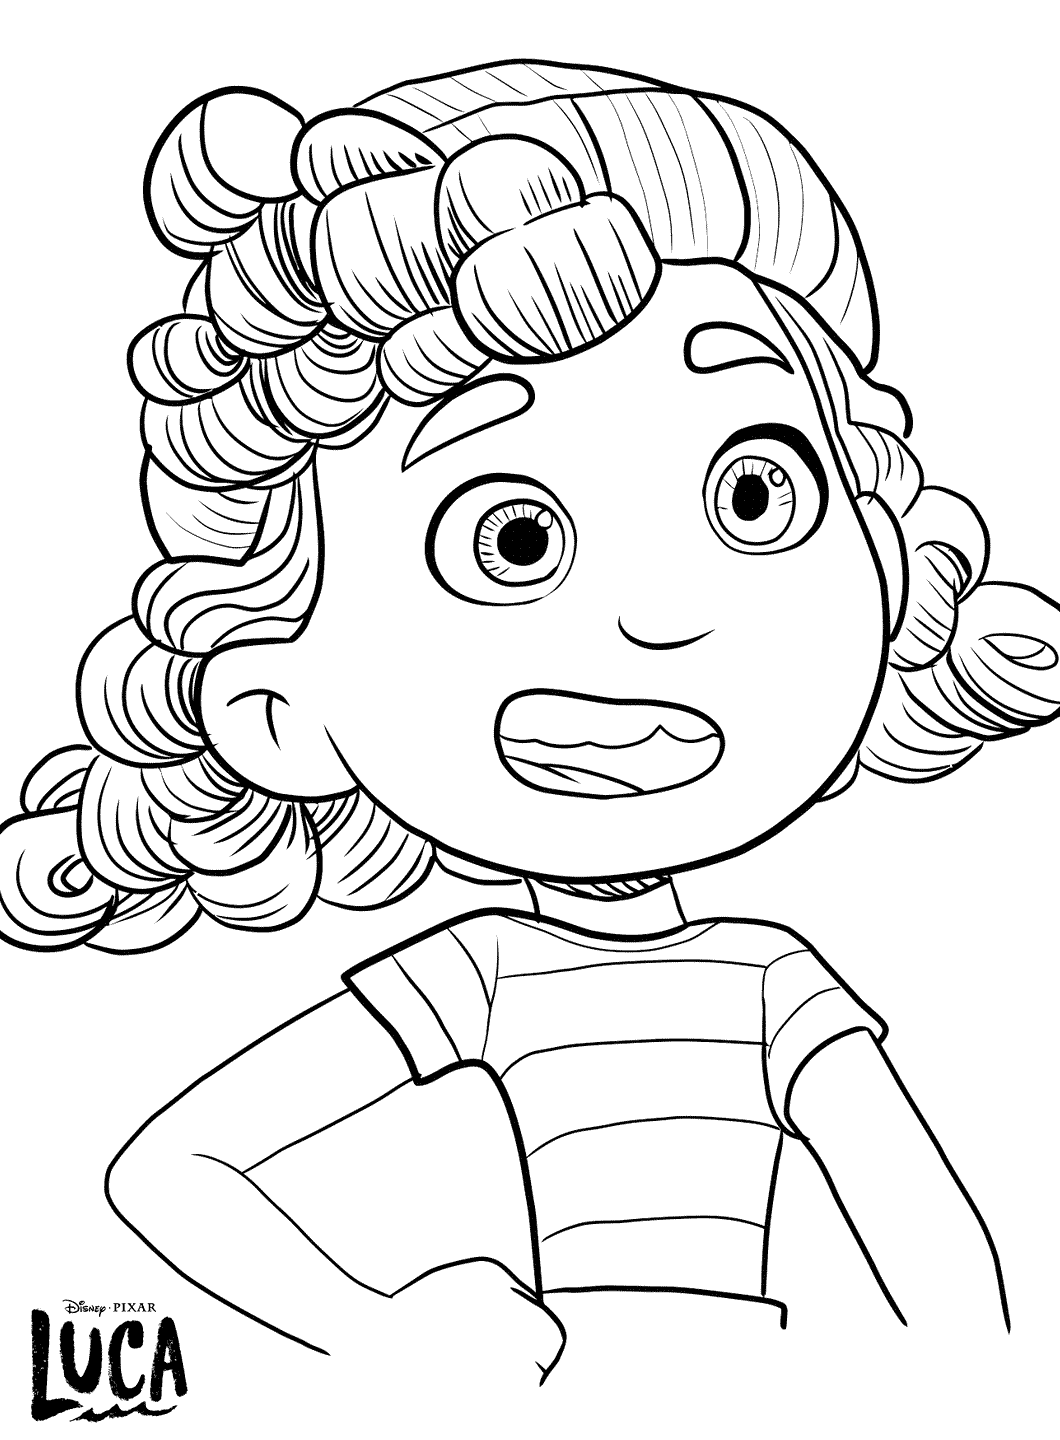 Giulia from Disney Luca coloring page